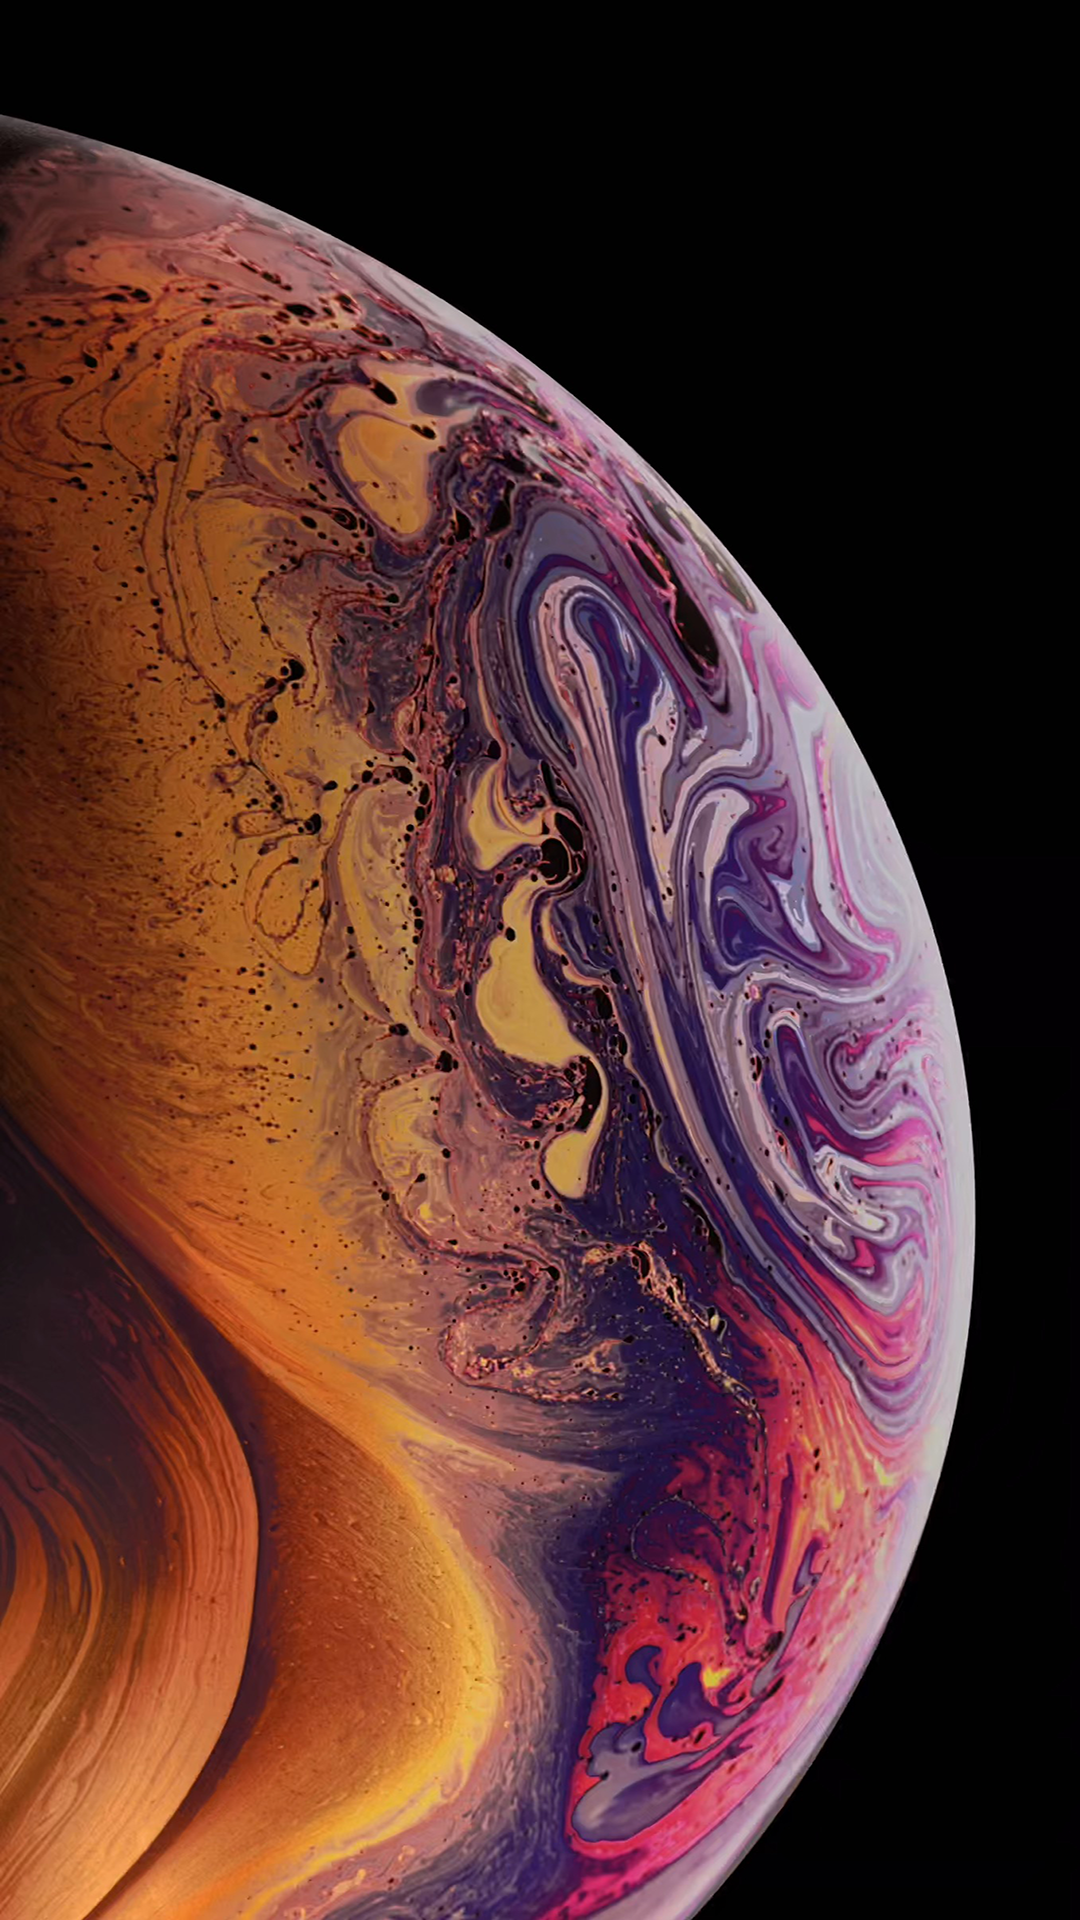 Wallpaper iPhone Xs Max And Xr